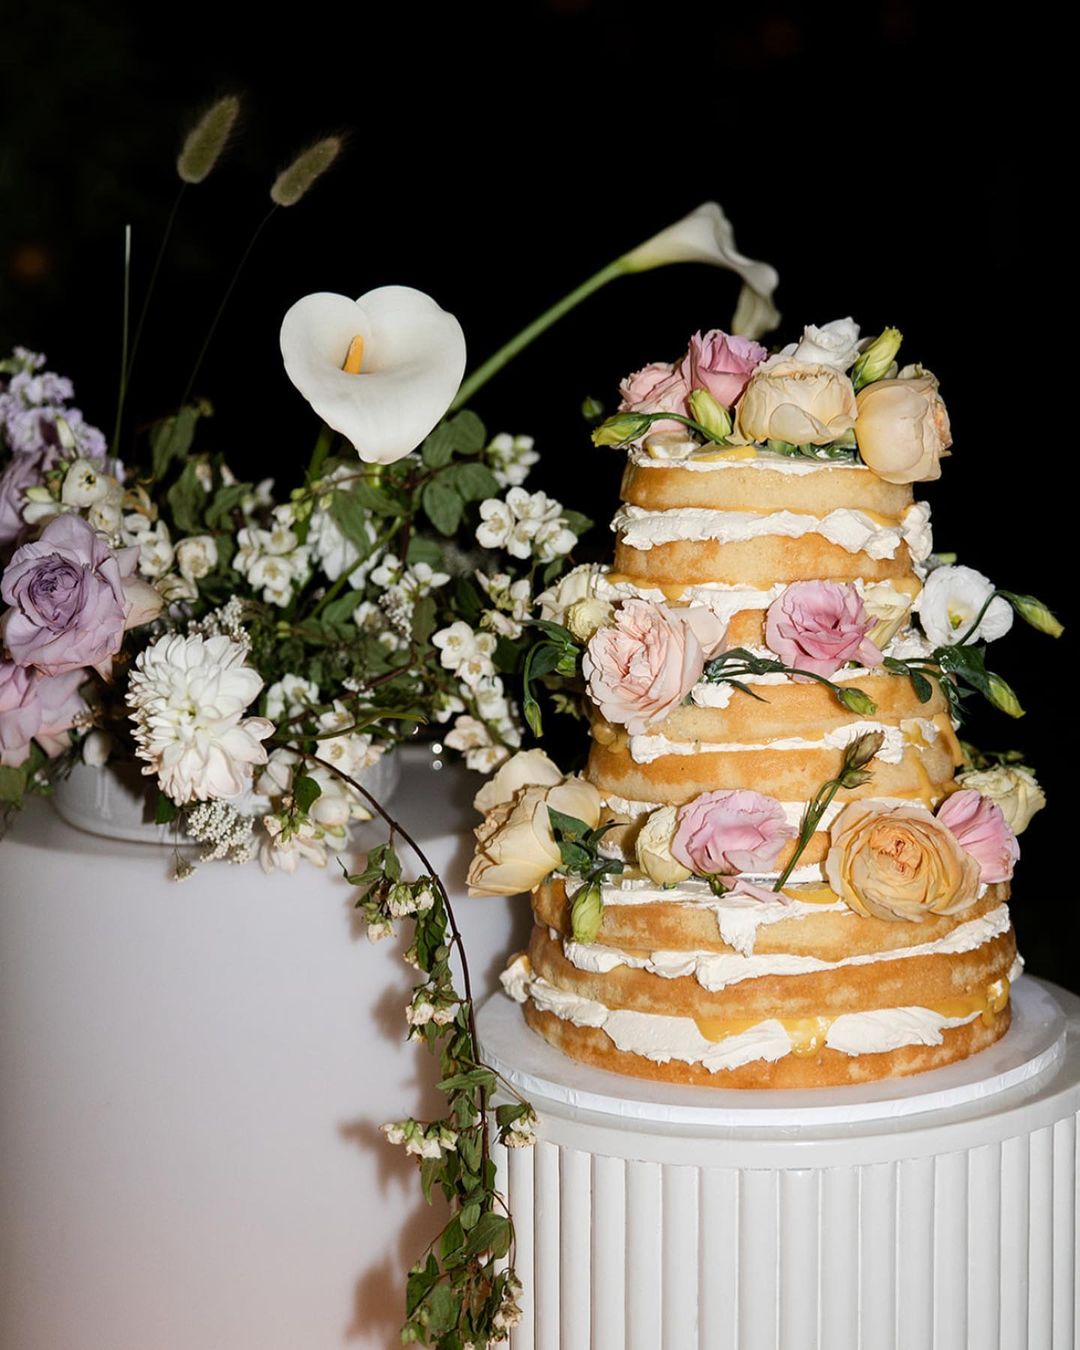 Wedding cake trends we're loving Stacy Brewer Cakes